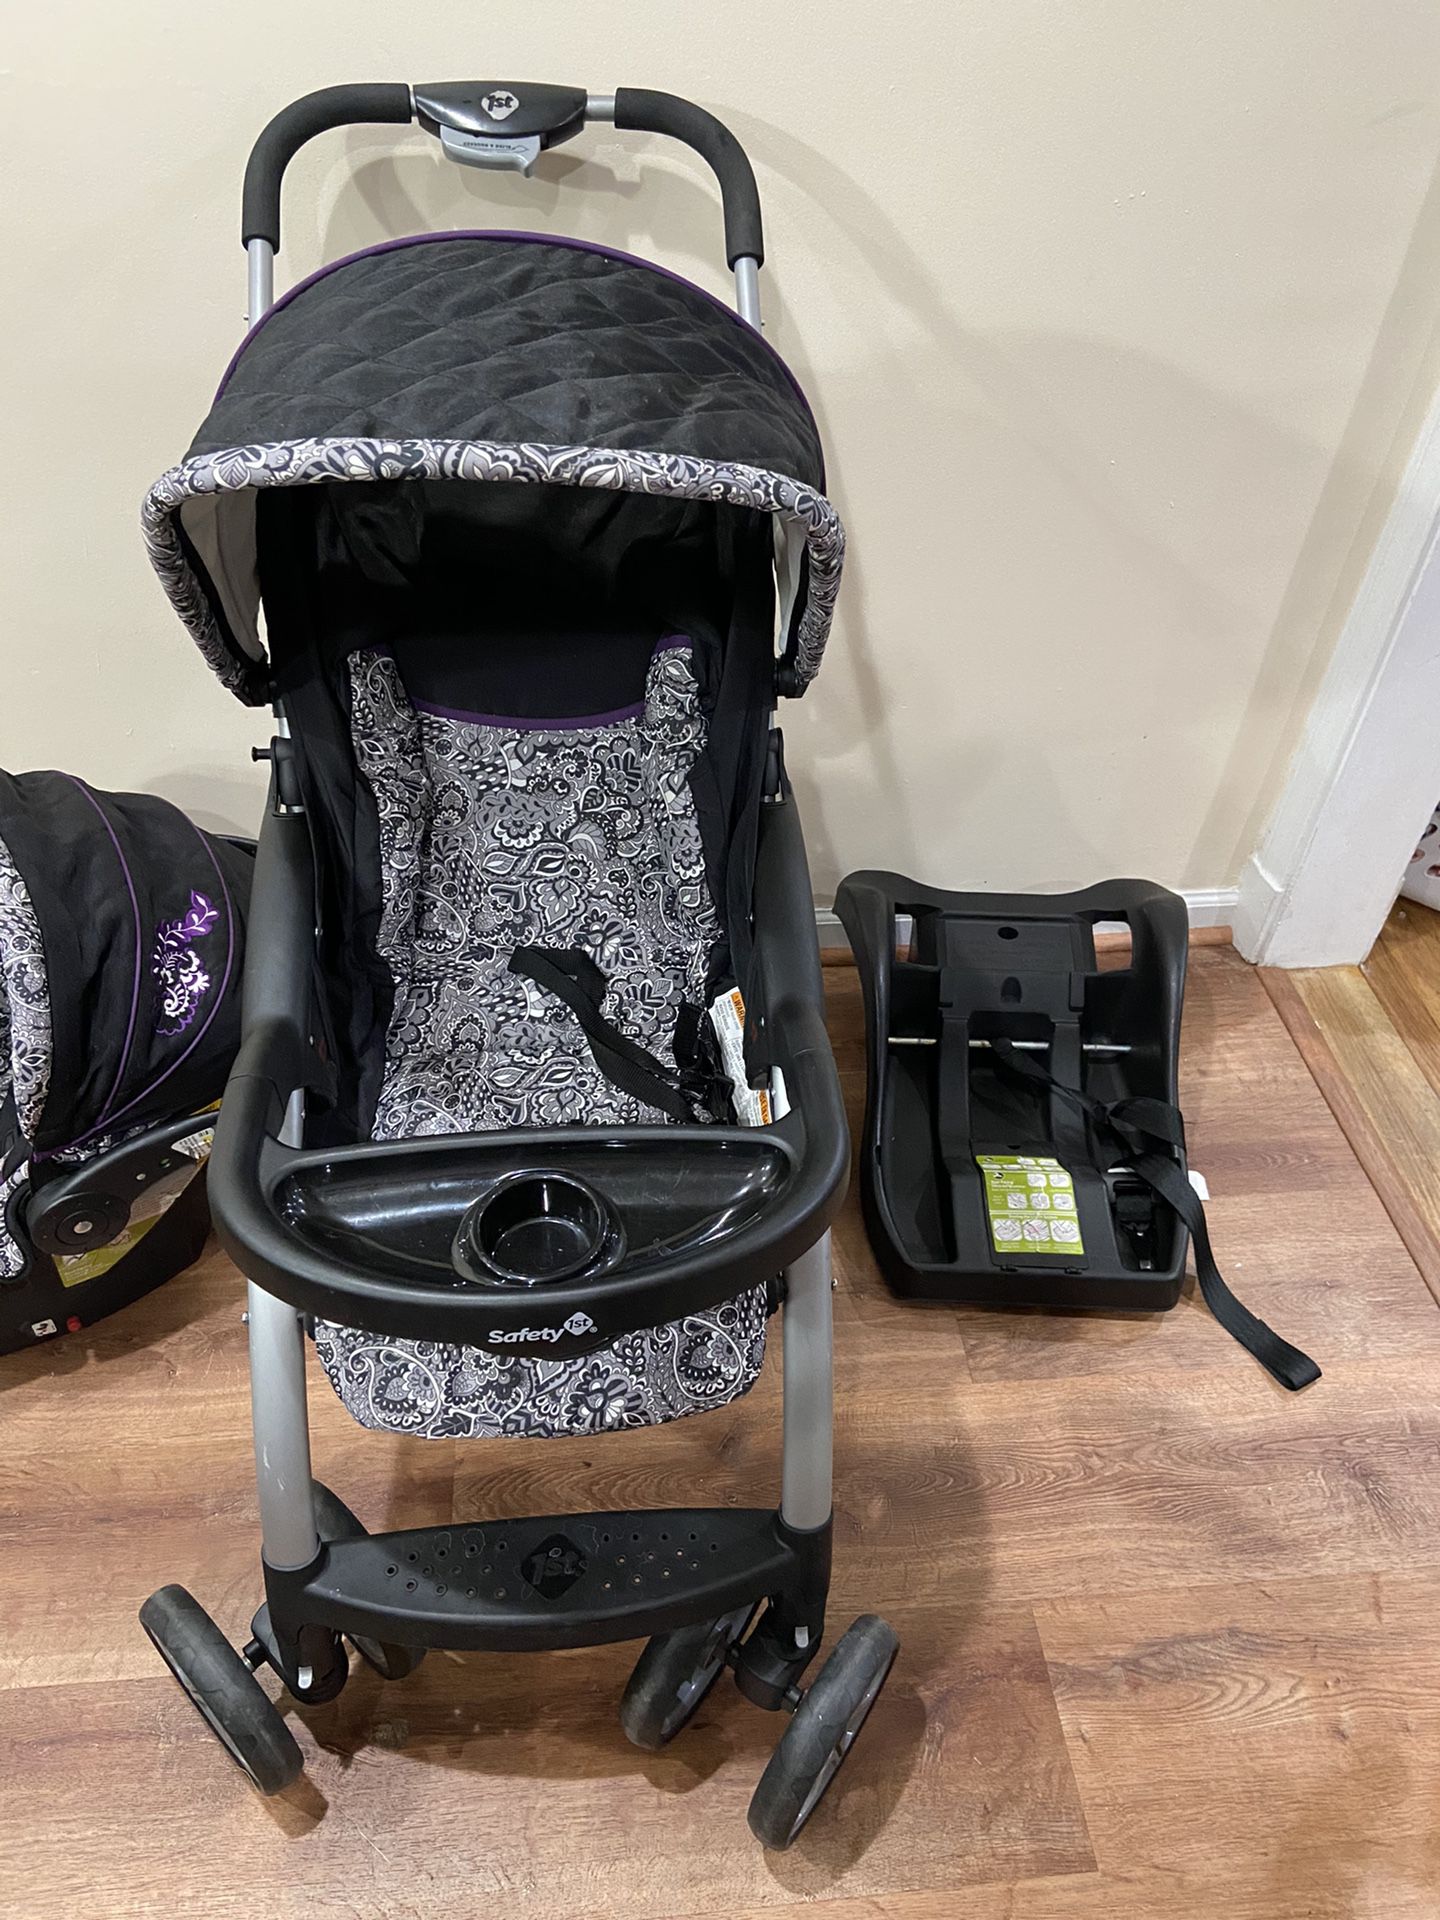 Stroller ,car seat and base